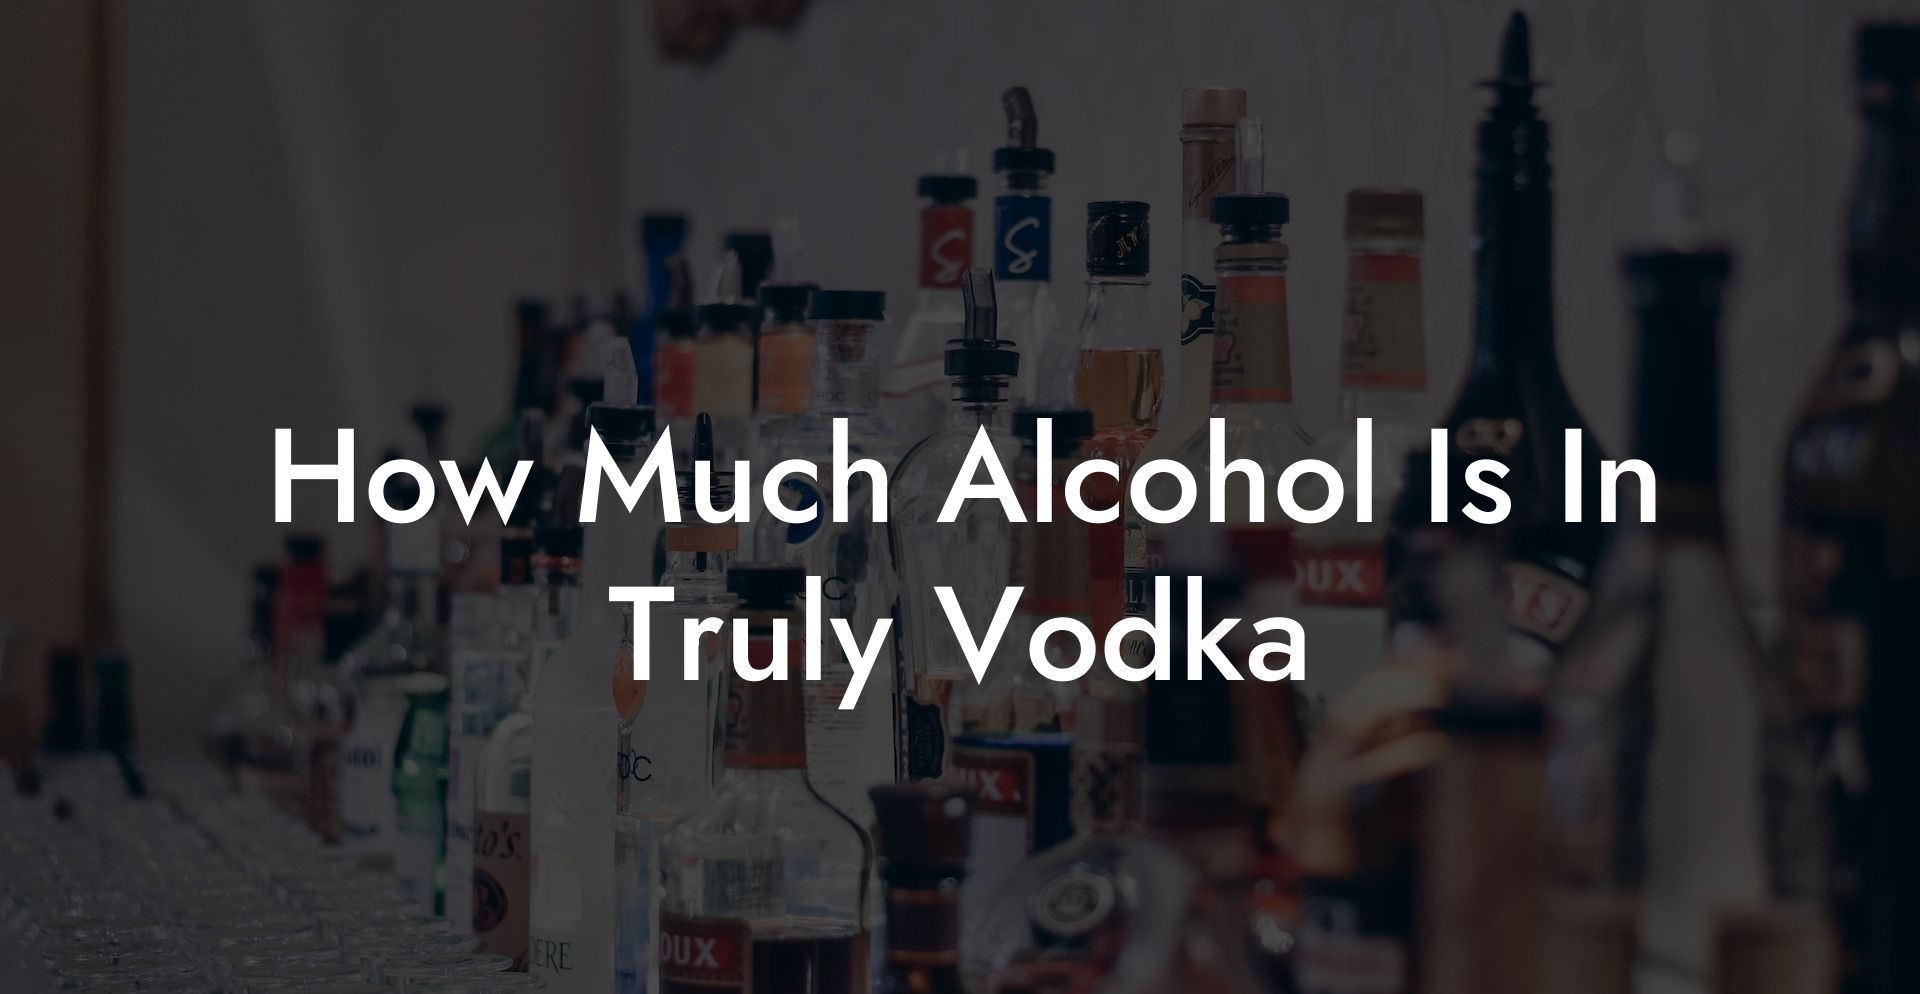 How Much Alcohol Is In Truly Vodka